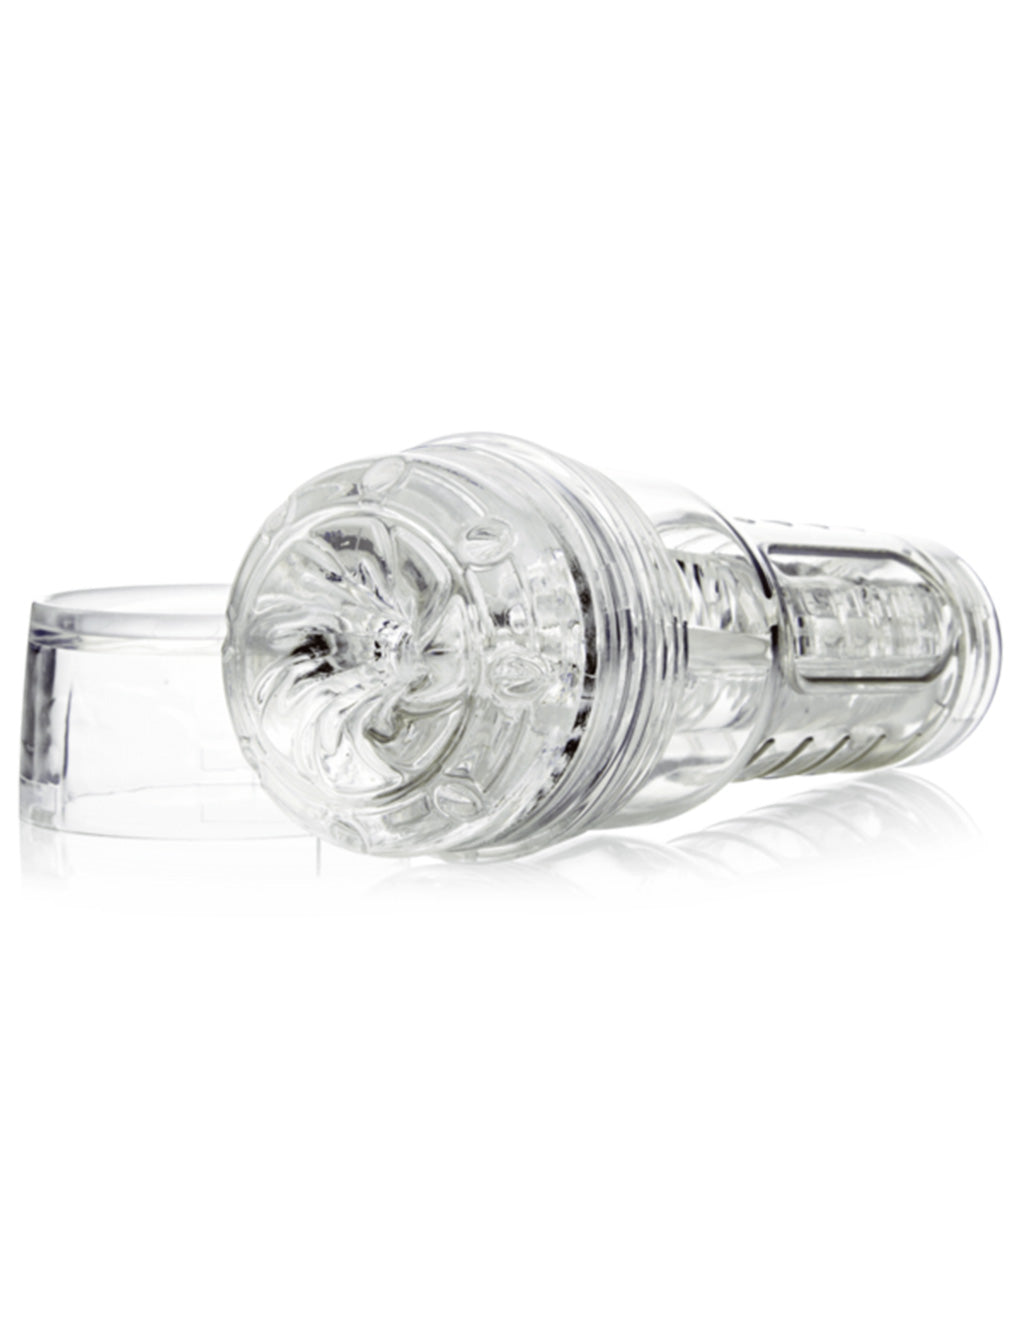 Clear Fleshlight Torque by Fleshlight side view